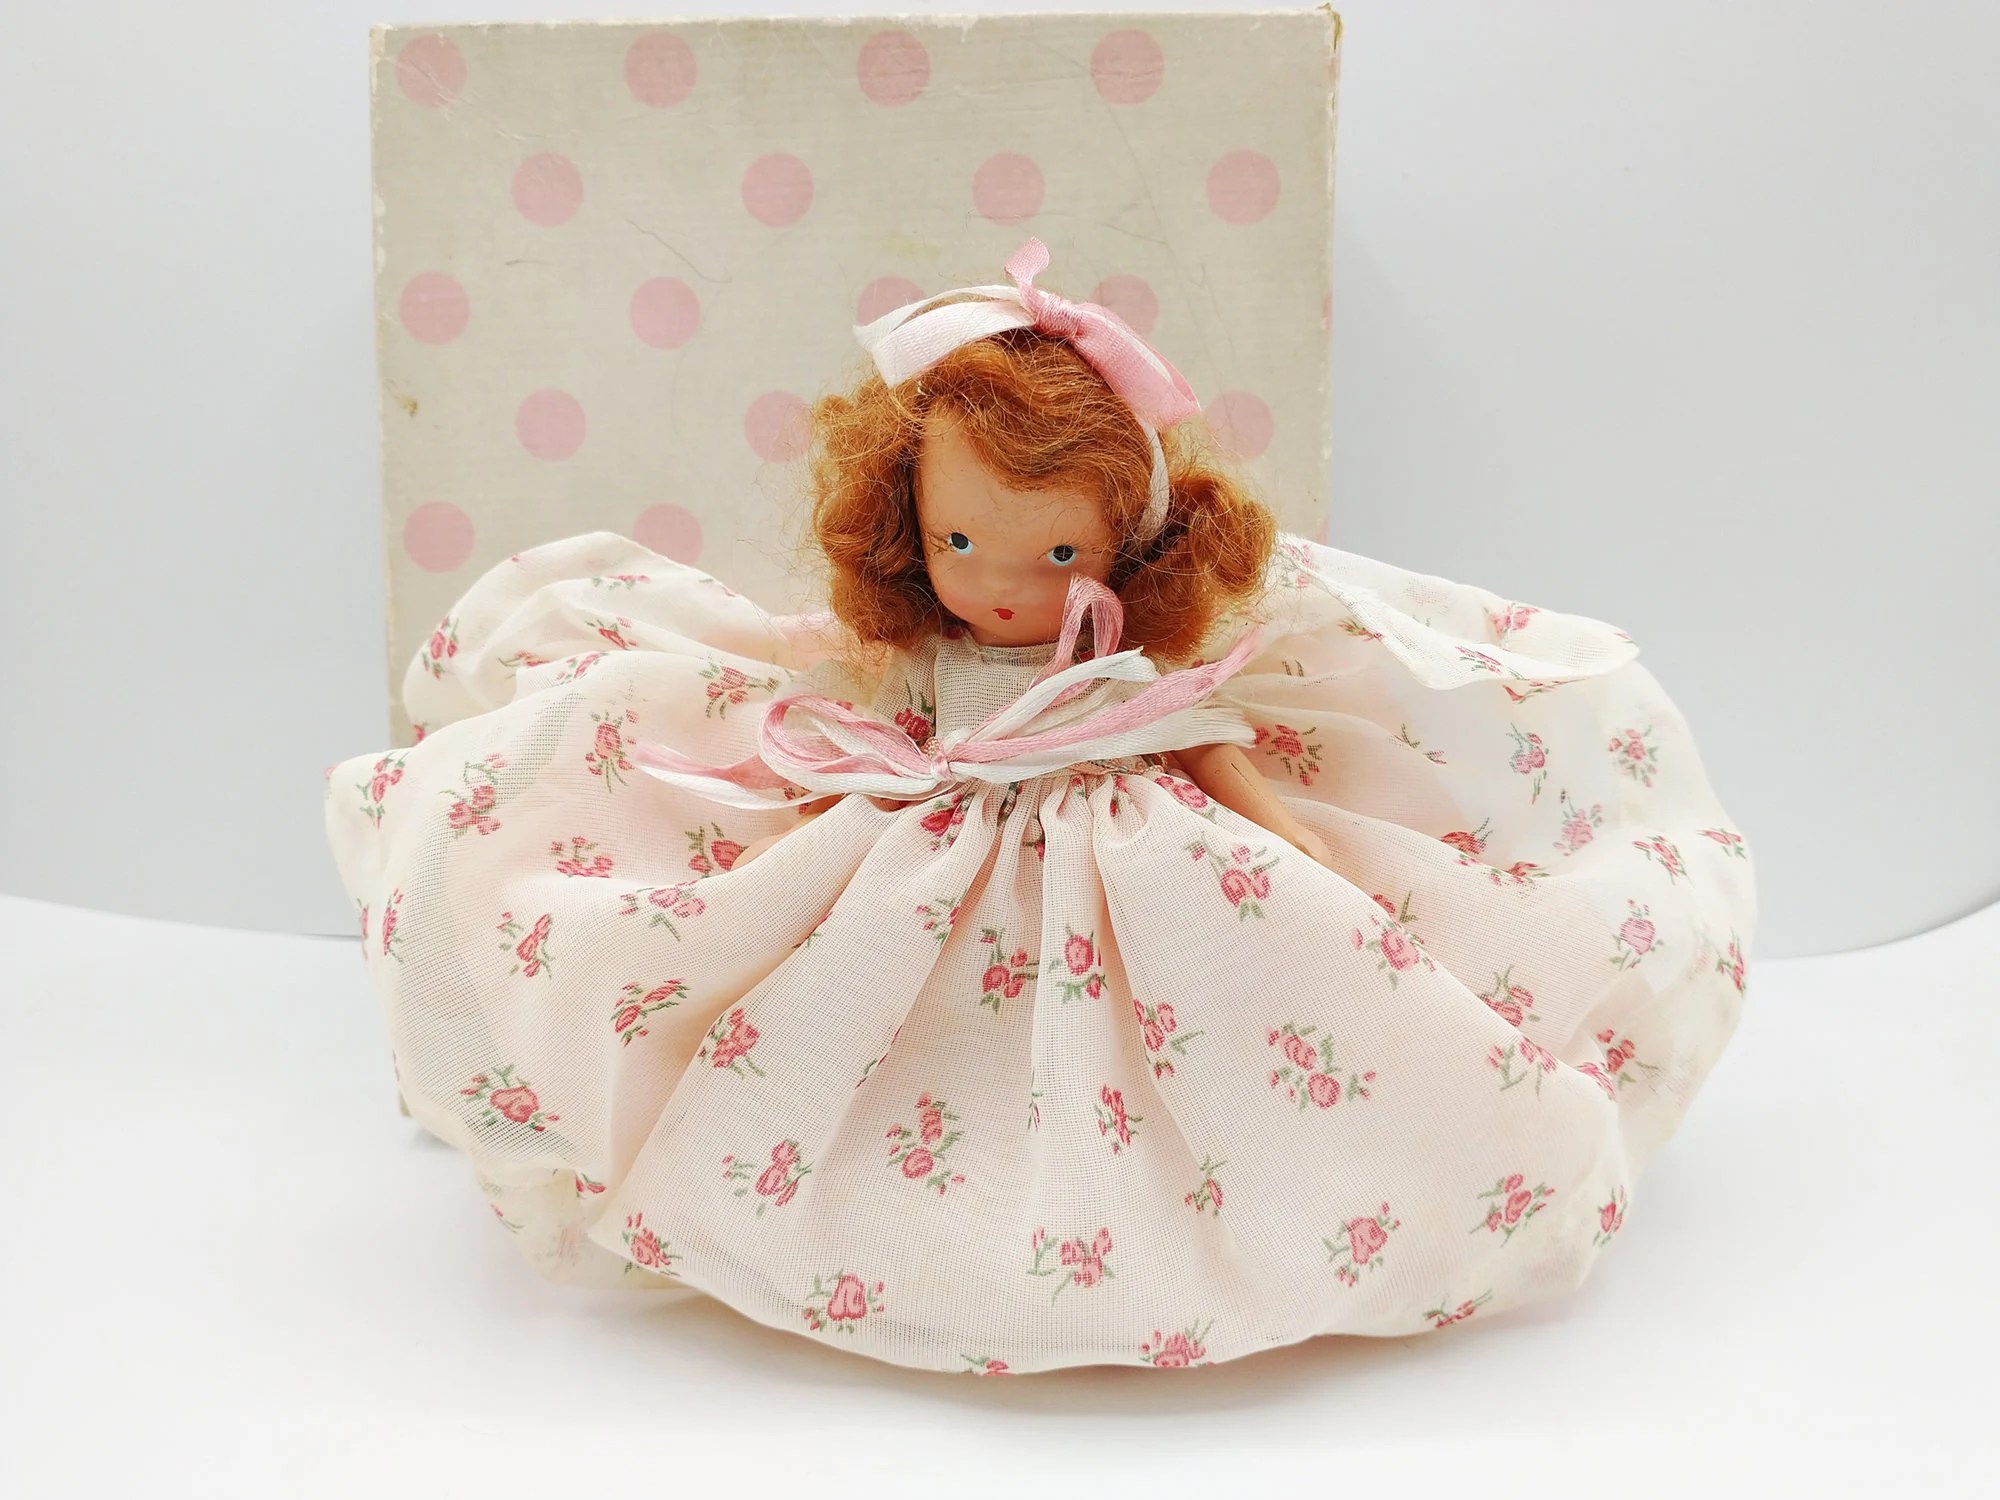 Nancy Ann Storybook Sugar and Spice and Everything Nice #158 Girl Doll - Storybook Series - Vintage 5.5” Bisque doll, Original Box 1936-1948